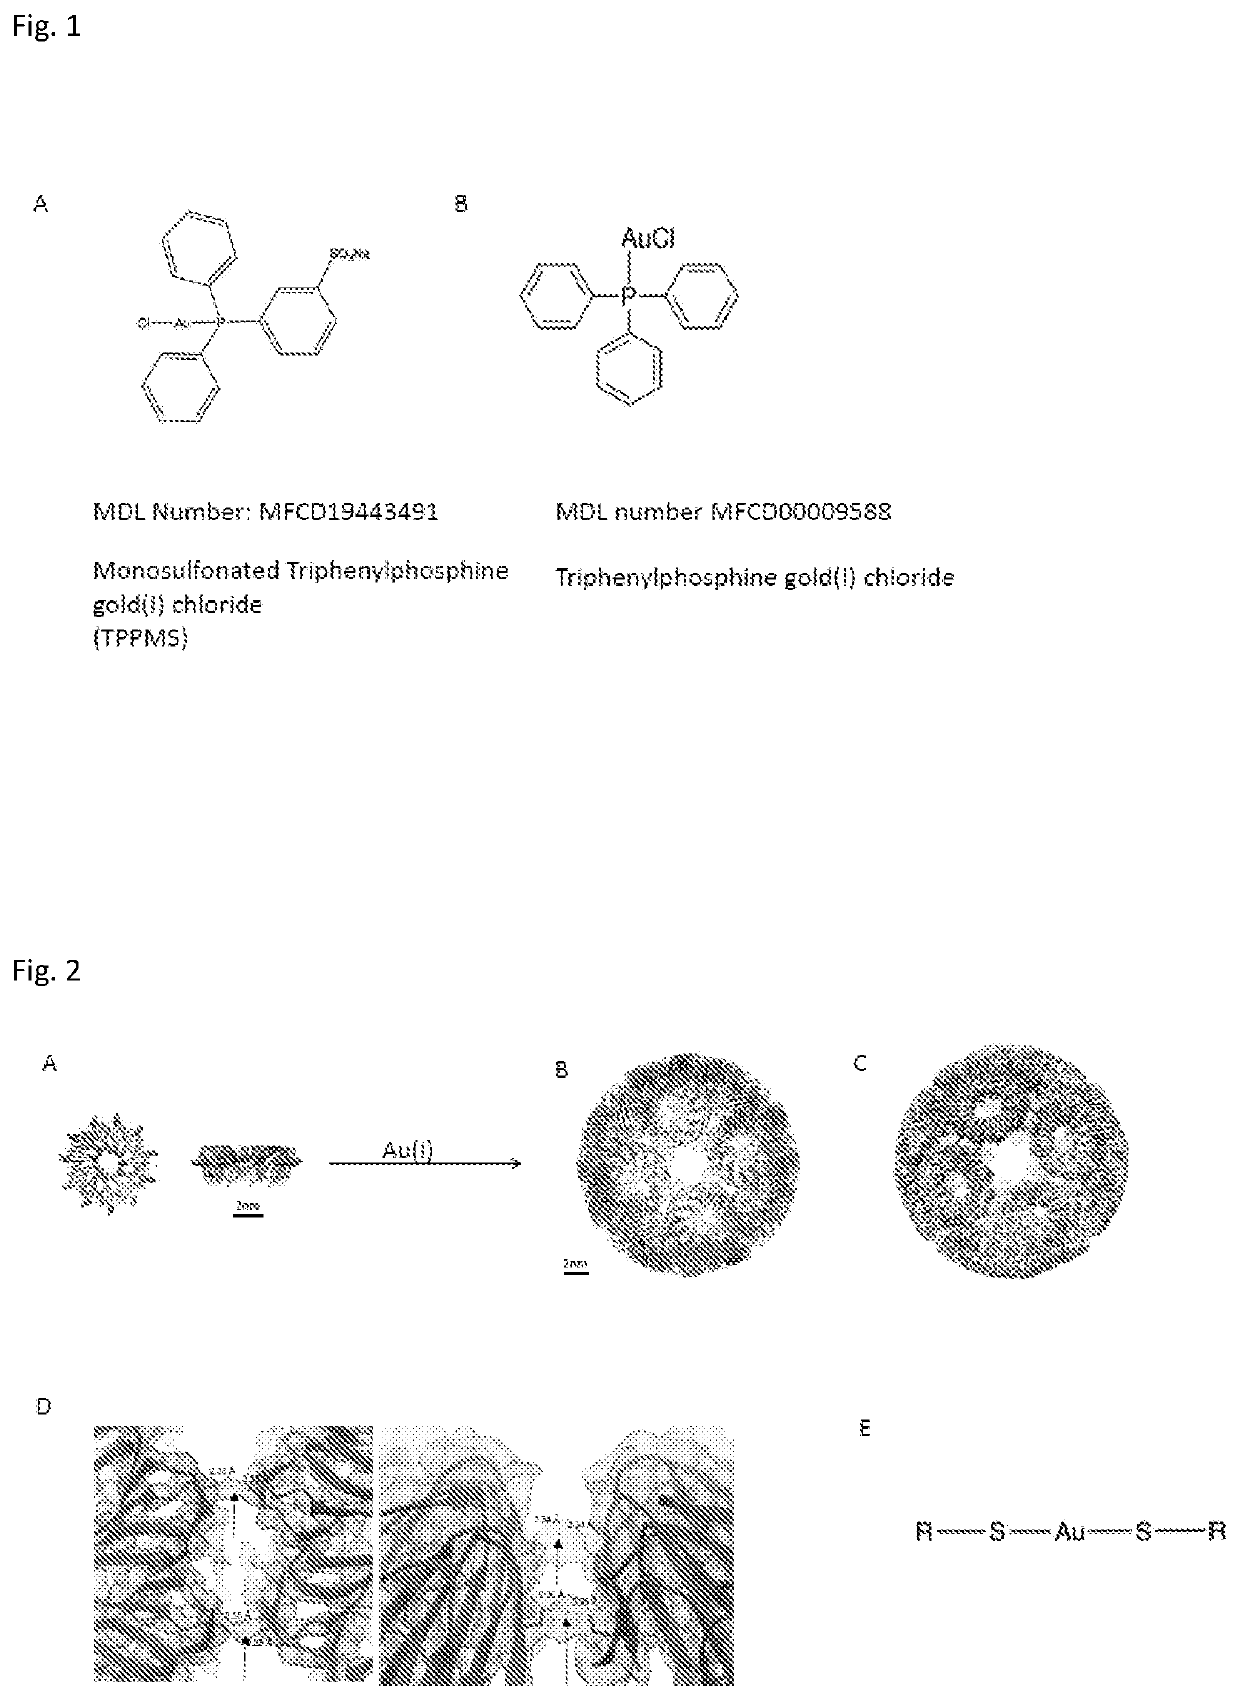 Method for conjugation of biomolecules and new use of gold donor for biomolecular complex formation